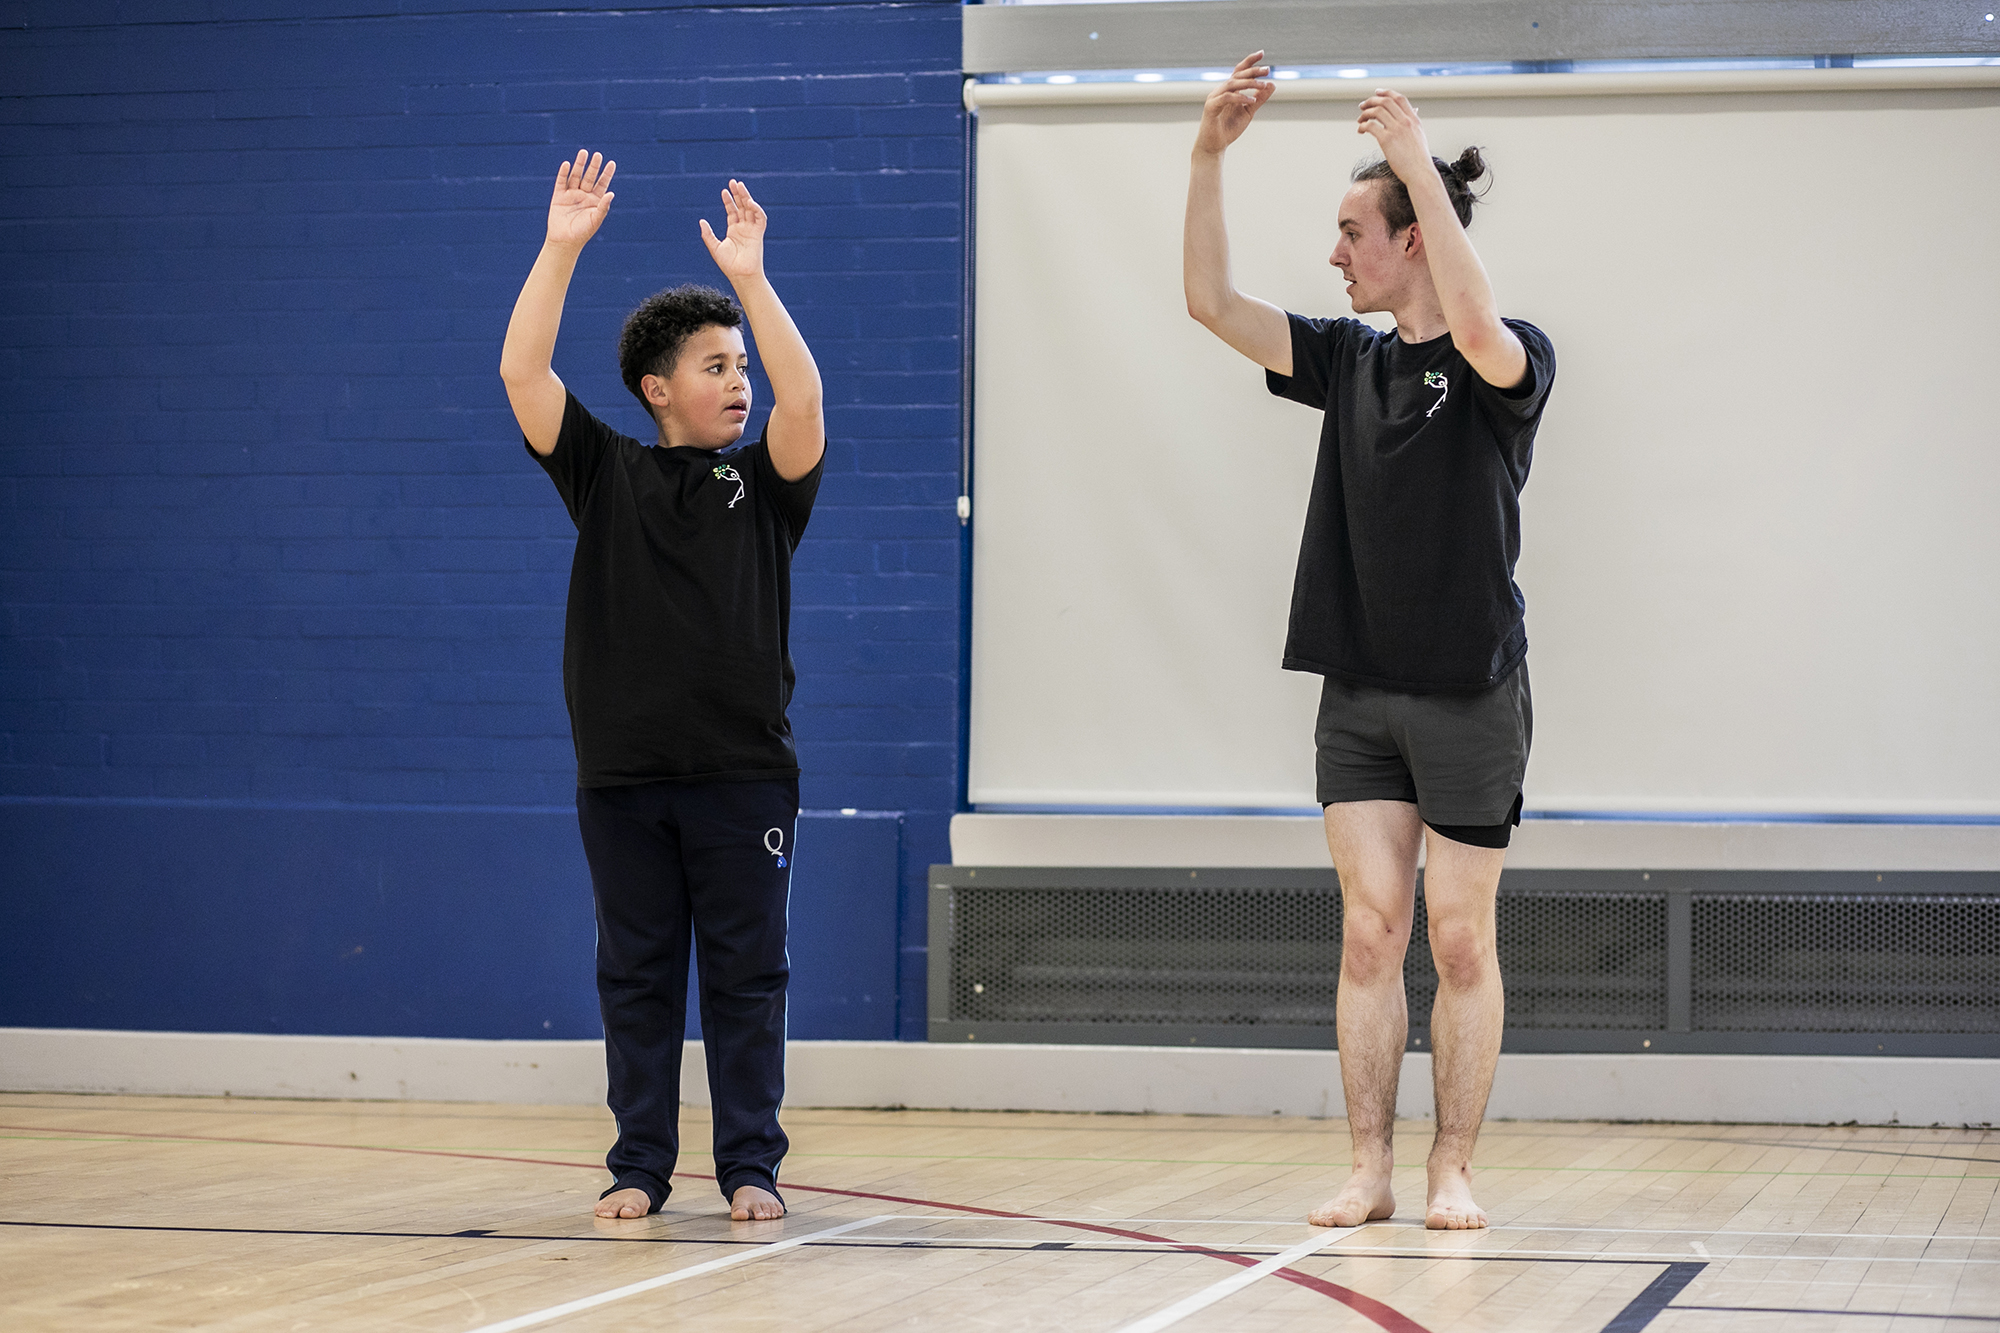 teenage male dance teacher reaching up to the sky with both arms teaching young boy dancer who is mirroring the arms in the air. In sports hall both wearing black PE kit